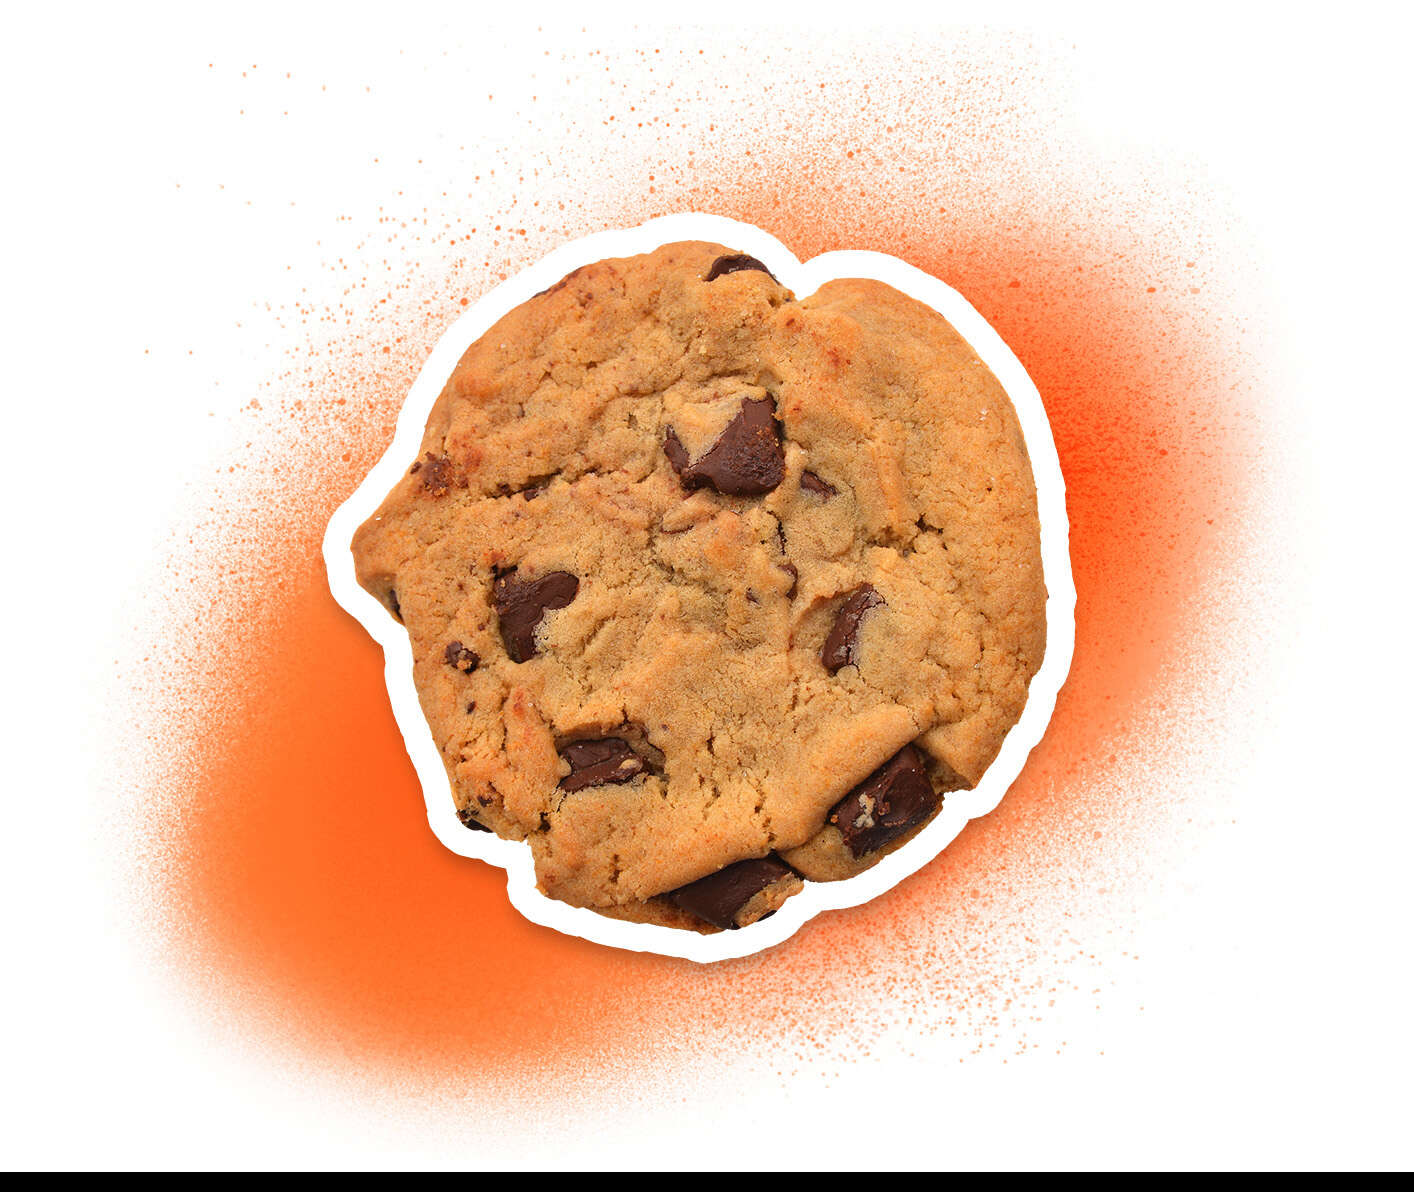 Toll house chocolate chip cookie